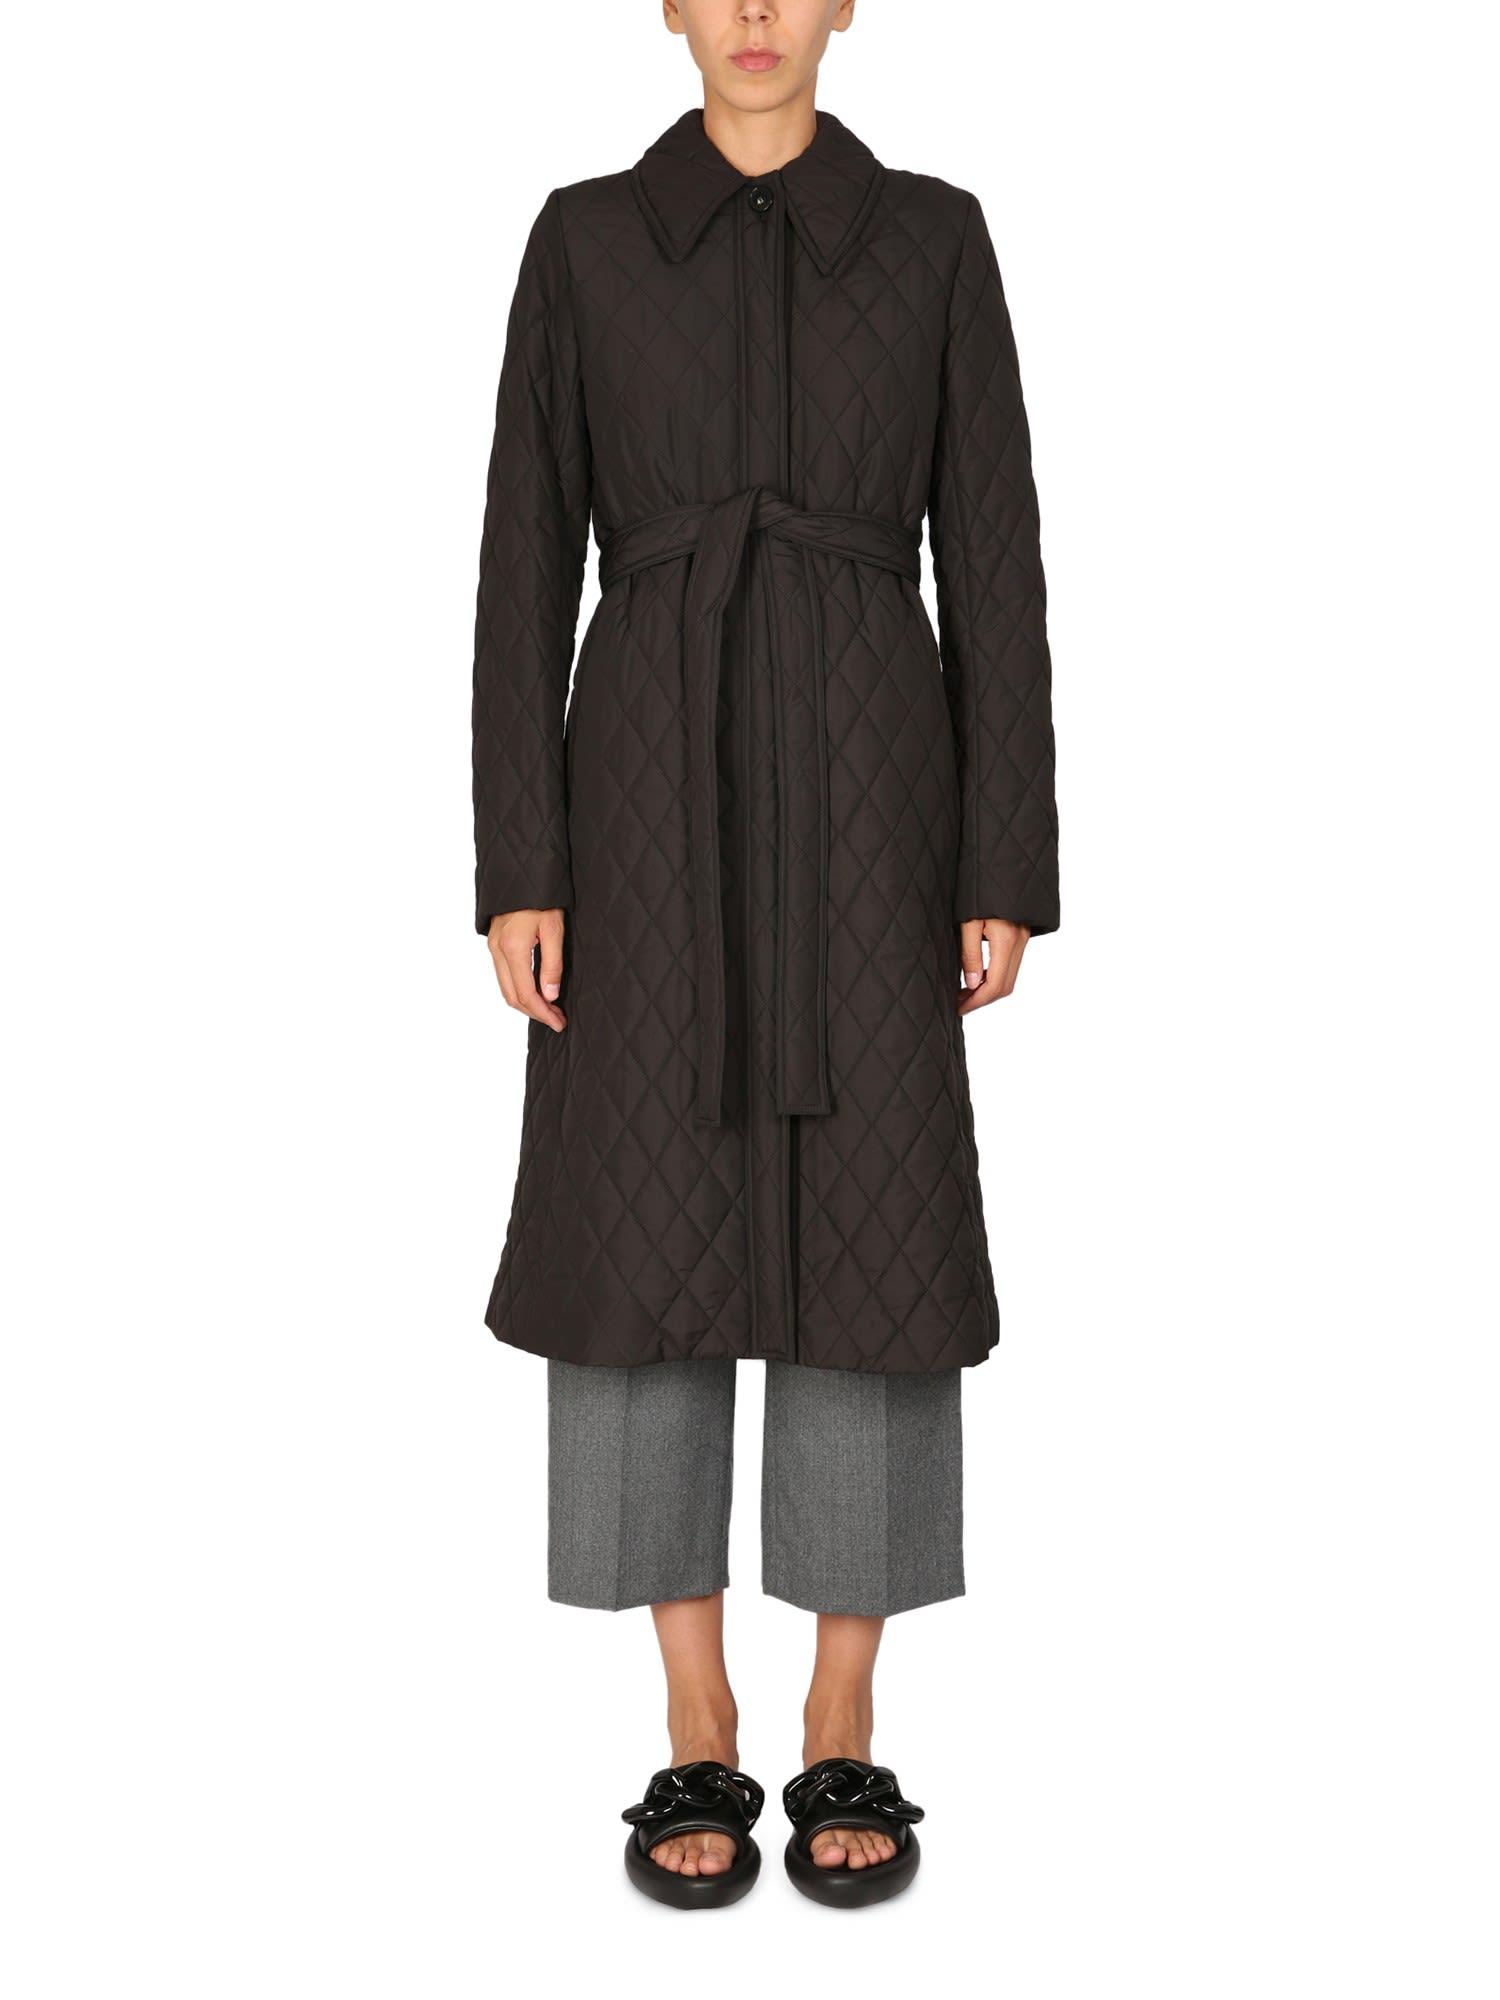 Stella McCartney Belted Trench Coat in Black | Lyst